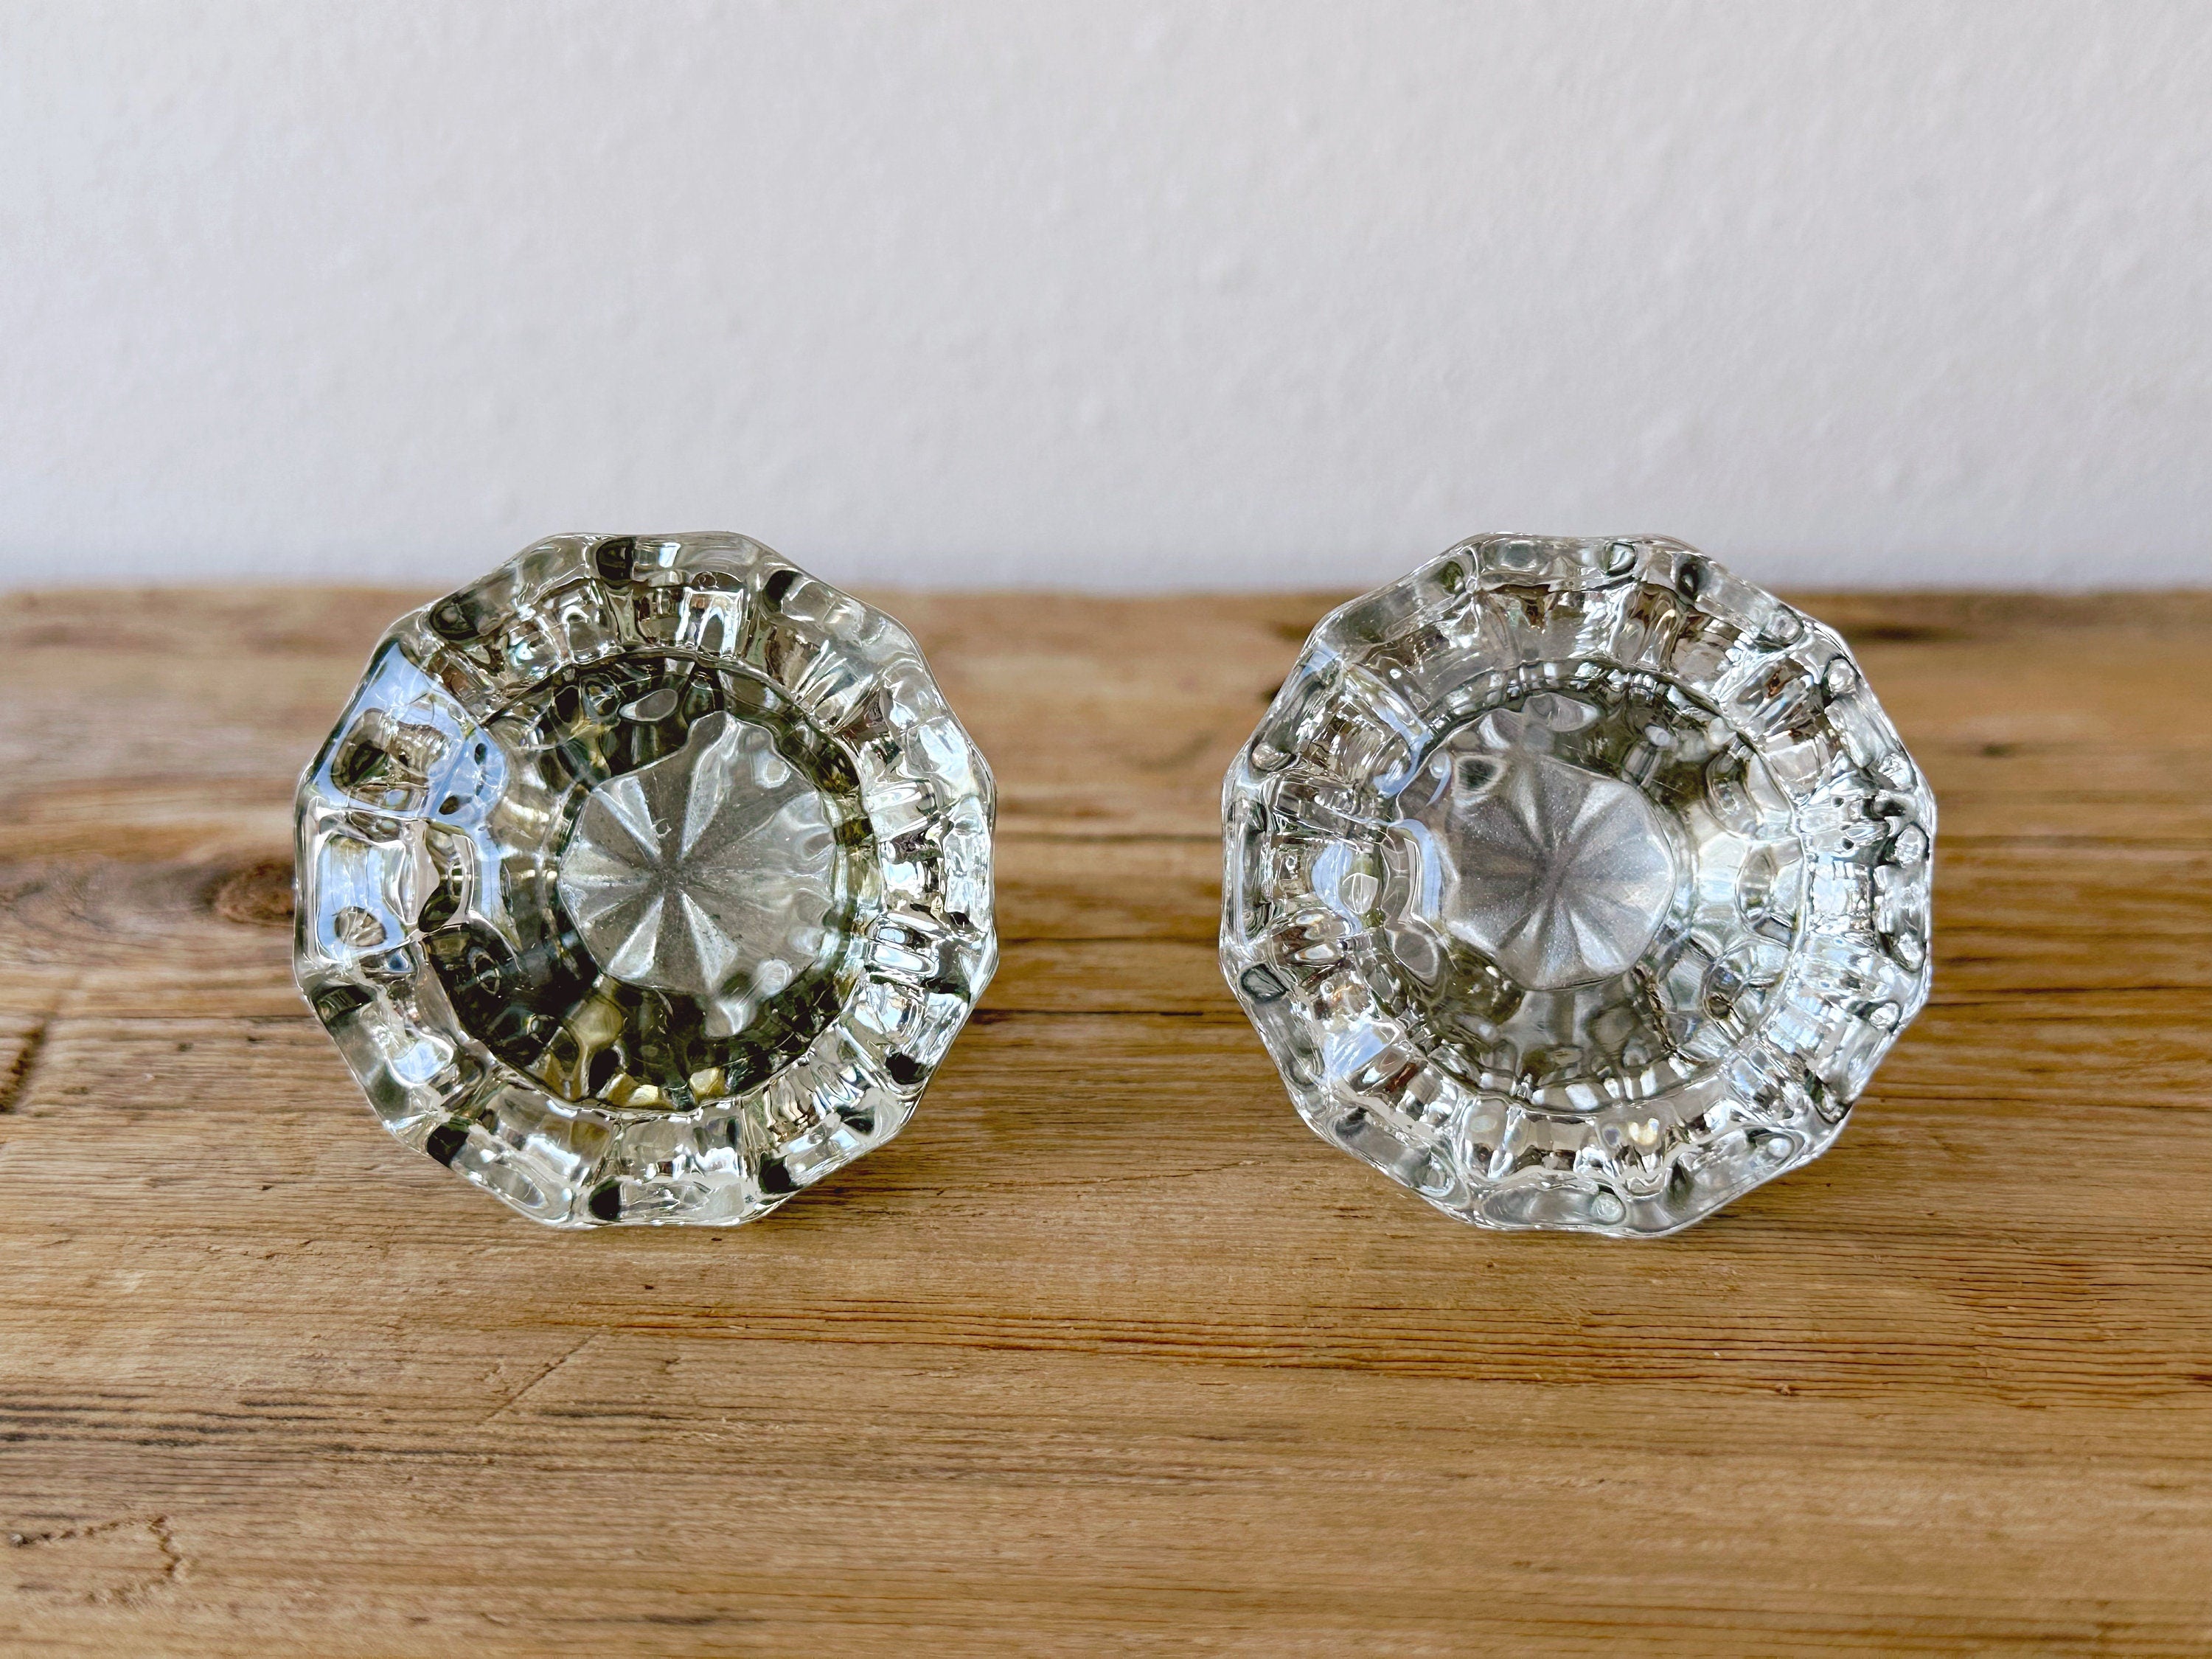 Pair of Vintage Crystal and Brass Door Knobs | Antique Architectural Salvage Glass Doorknob Handles | Home Renovation Hardware